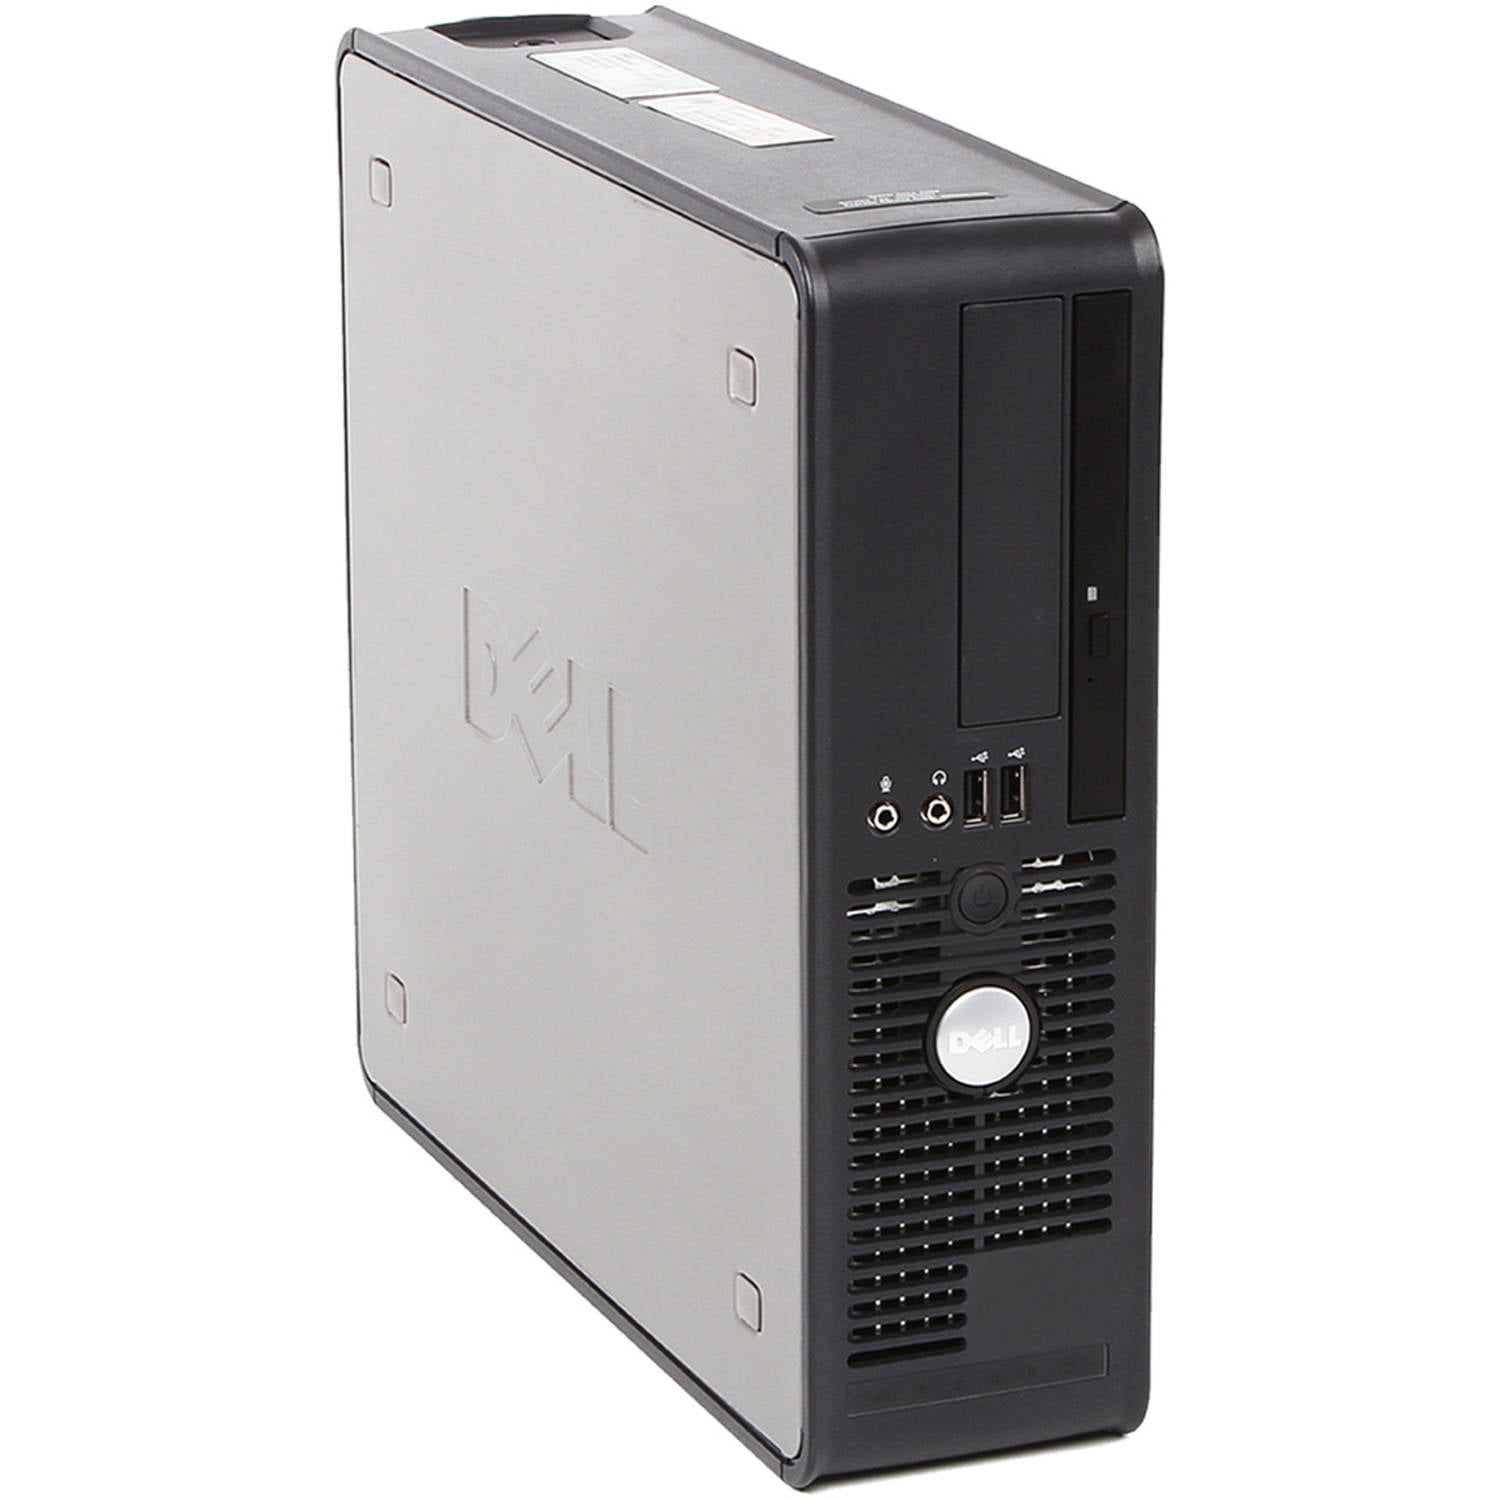 Refurbished Dell Gx755 Small Form Factor Desktop Pc With Intel